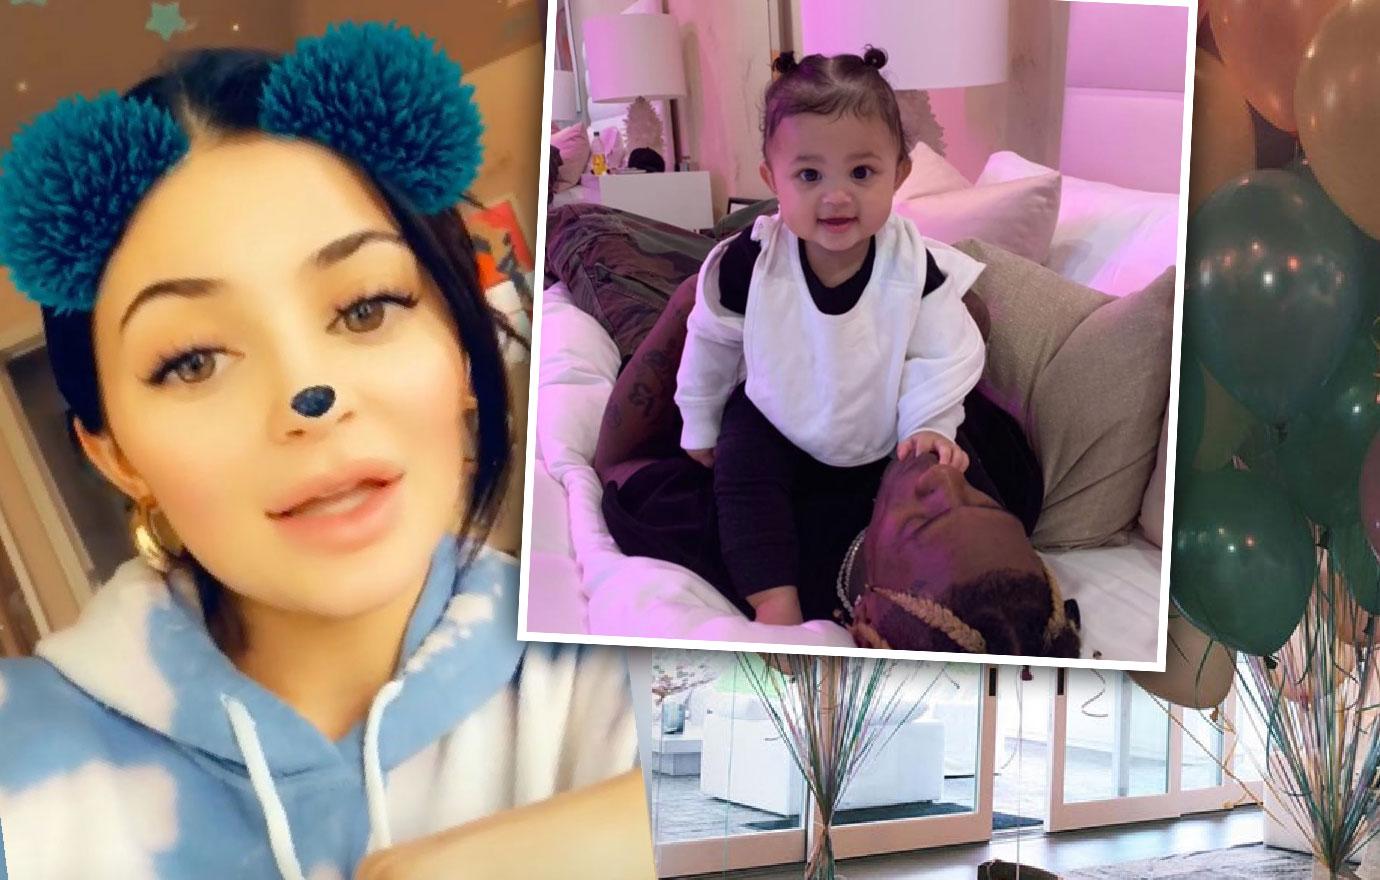 Kylie Jenner Documents Daughter Stormi's First Day Of School, With